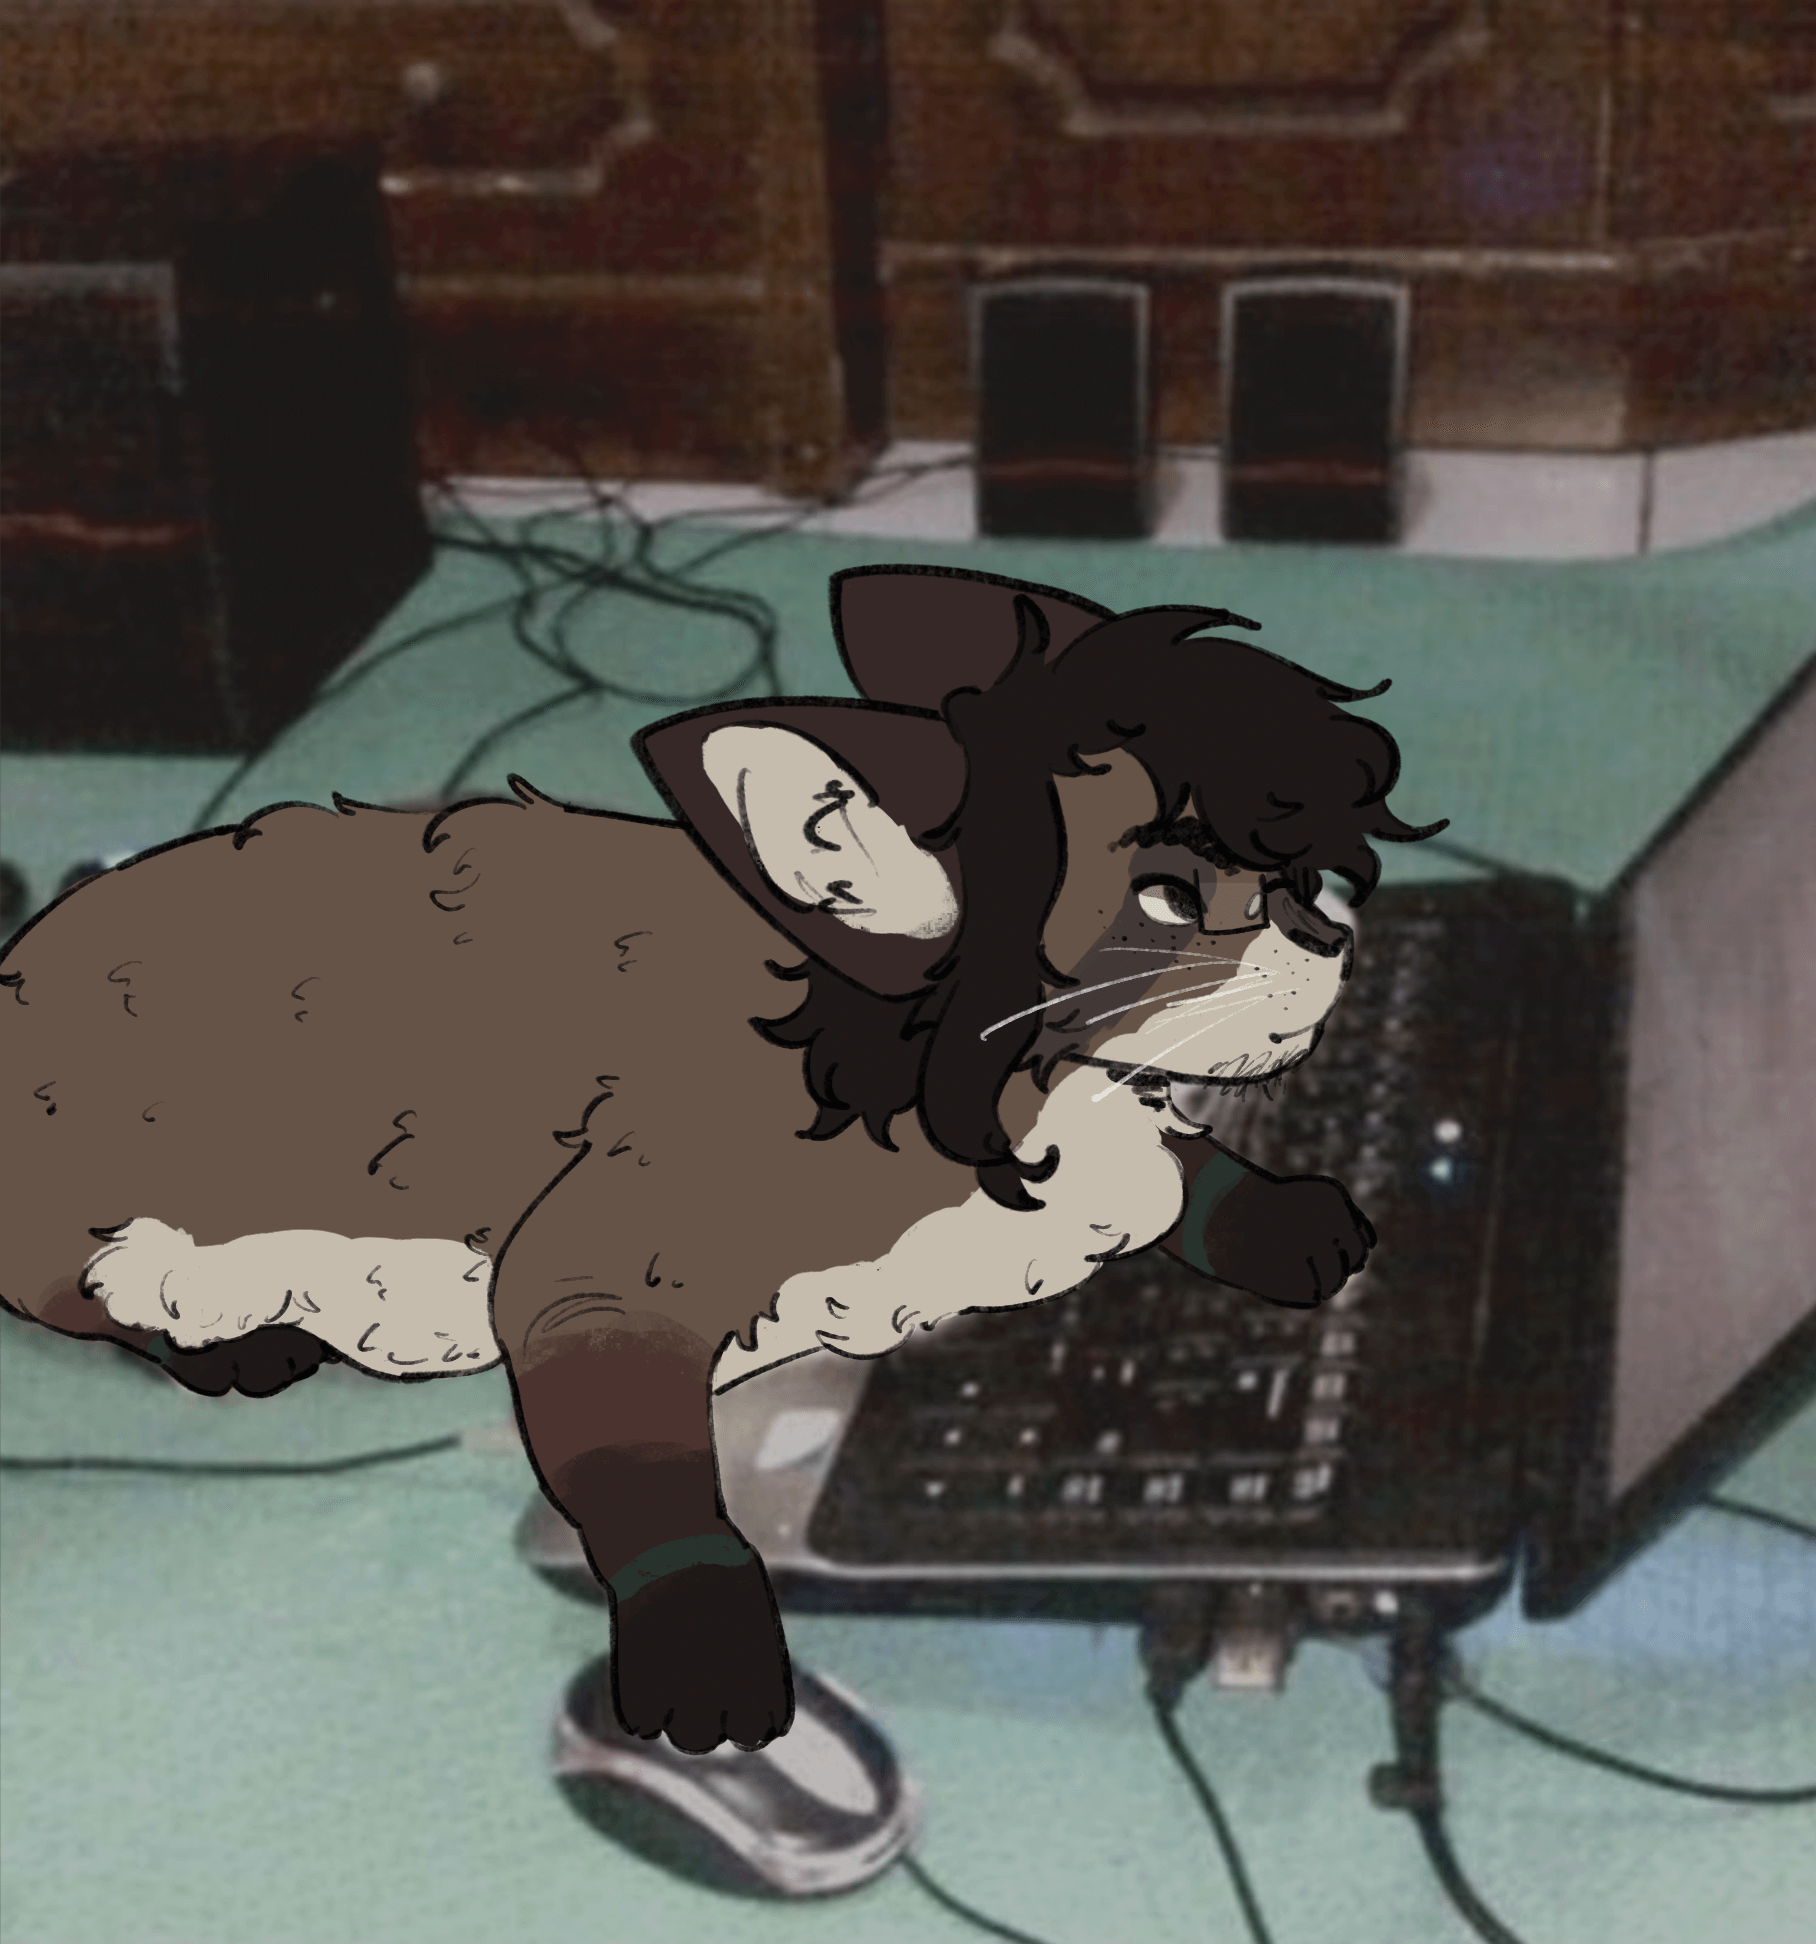 A drawing of a brown and cream colored cat with long black hair laying down using a mouse and looking at a laptop